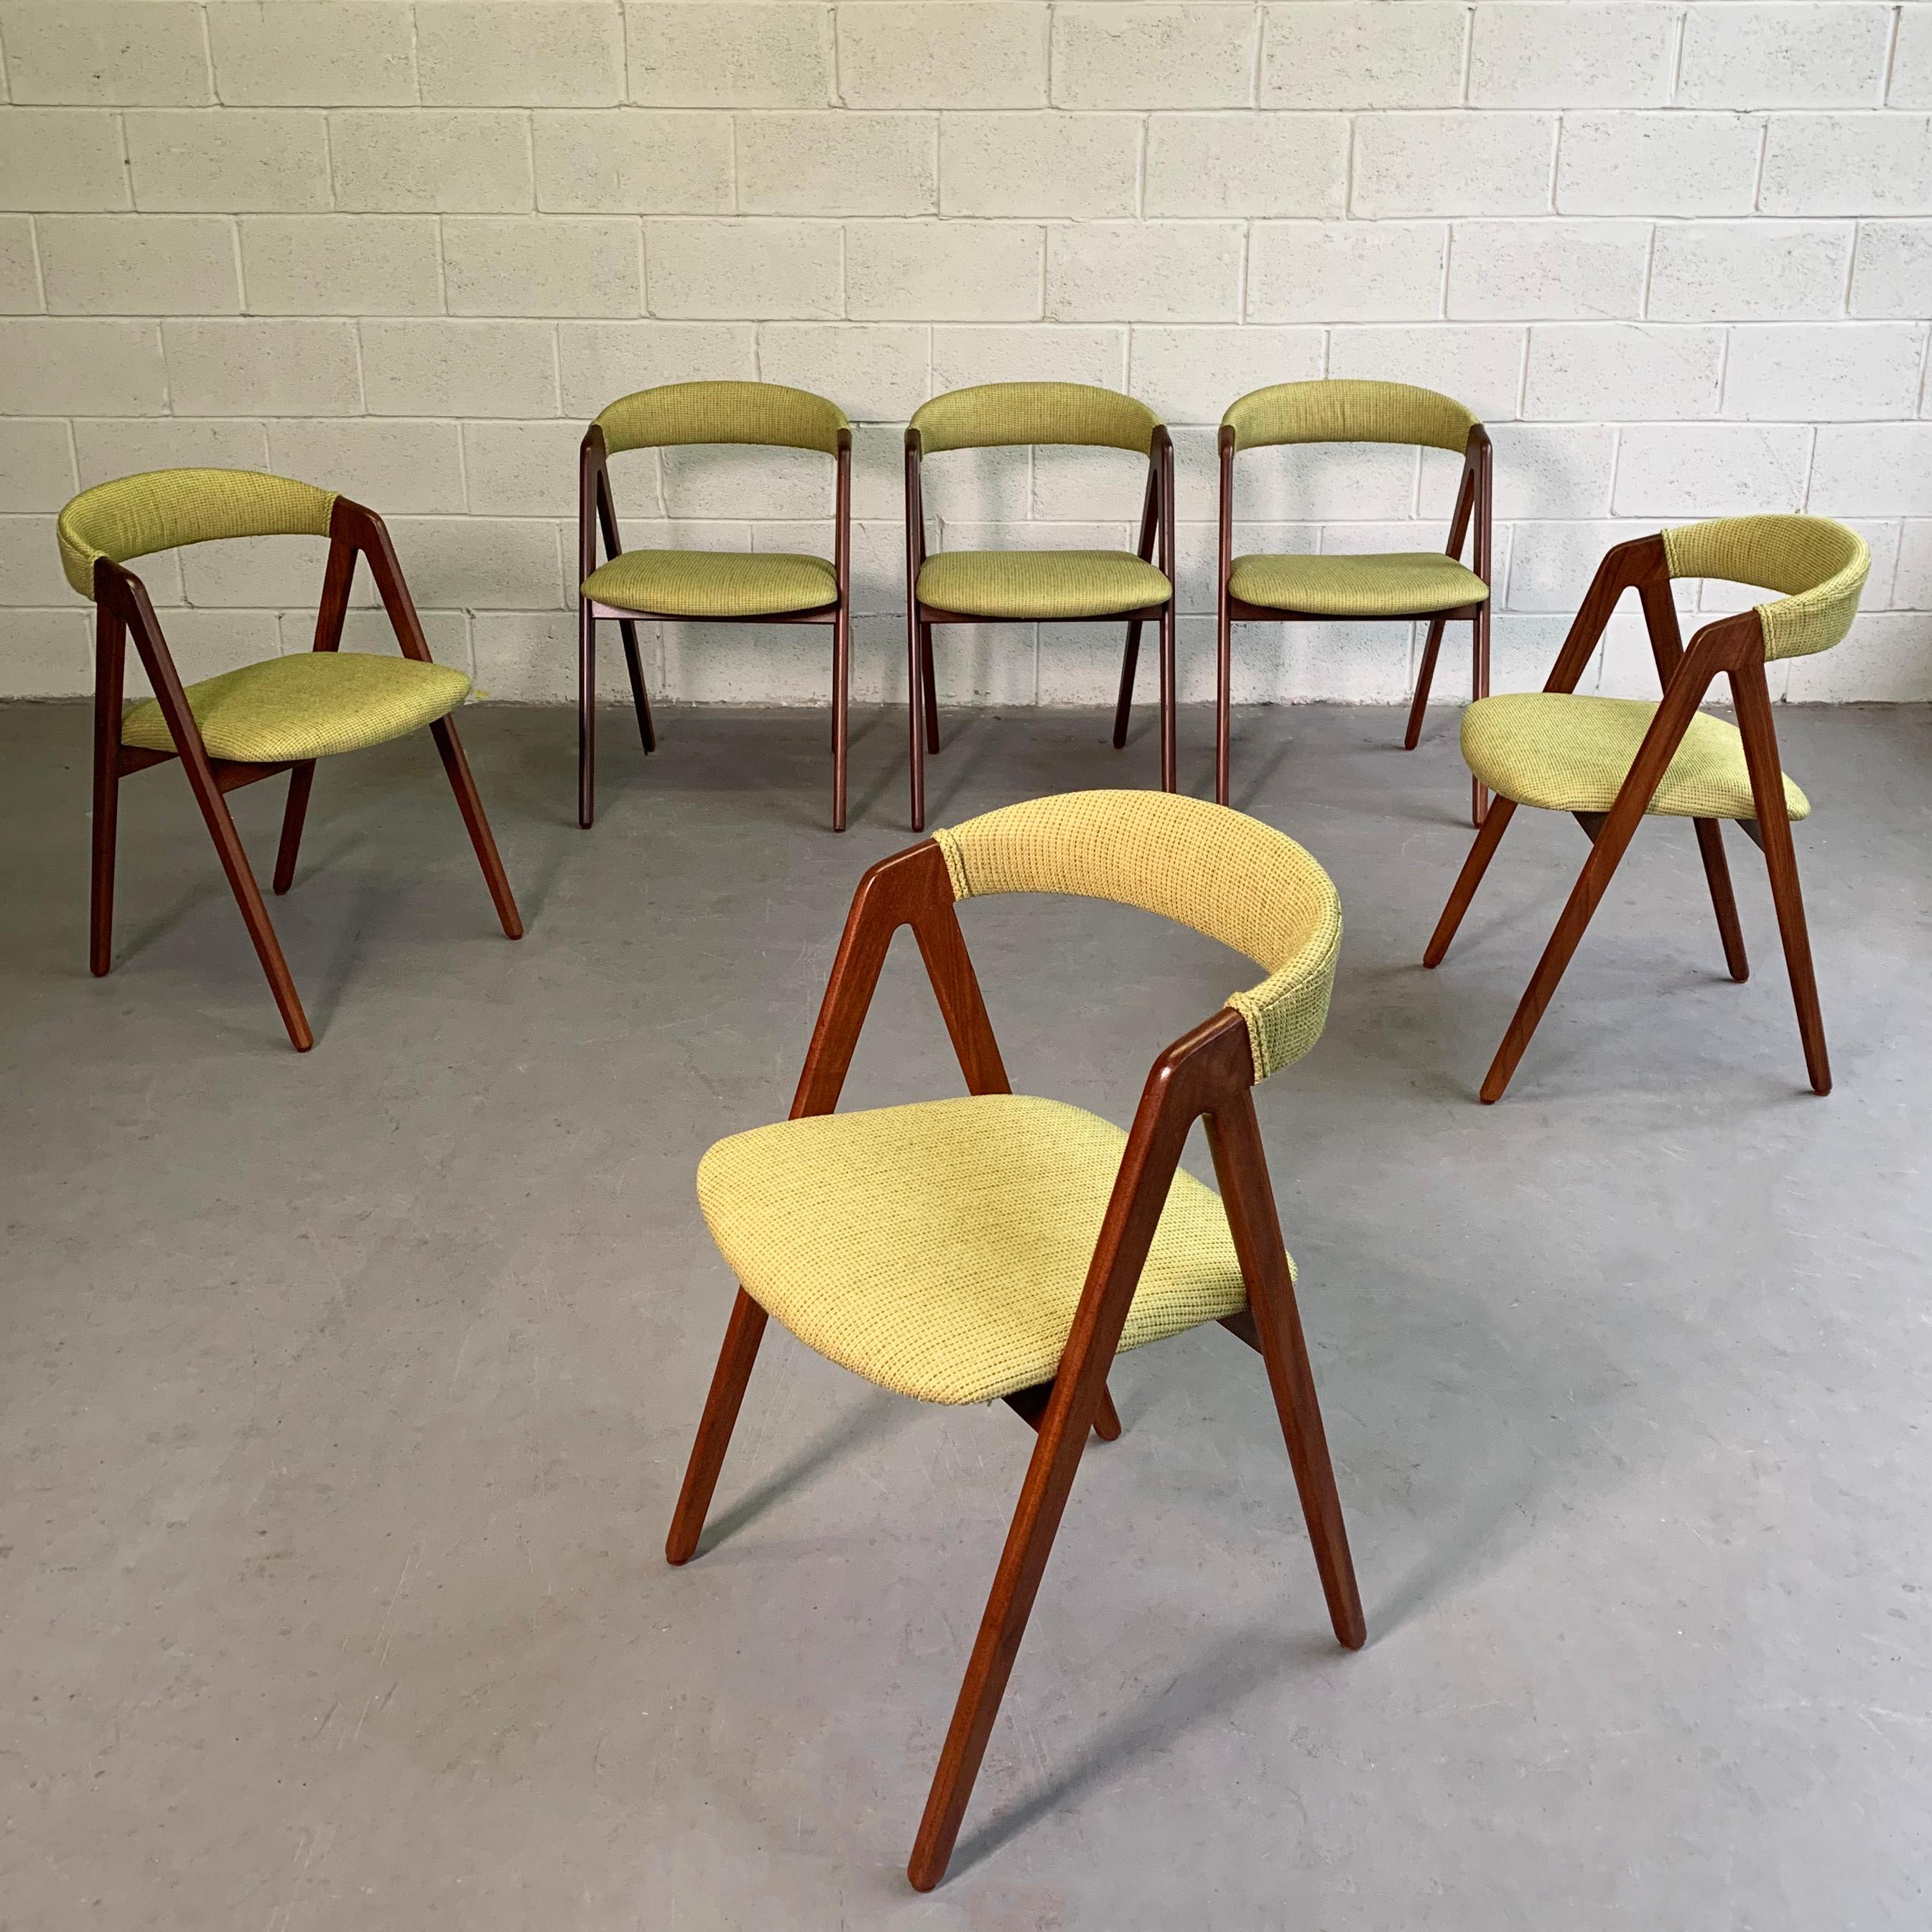 Set of 6, Scandinavian Modern, teak compass dining chairs by Kai Kristiansen with chartreuse, woven cotton upholstered seats and backs. The chairs feature elegant, minimal lines with scoop backs at just about table height.